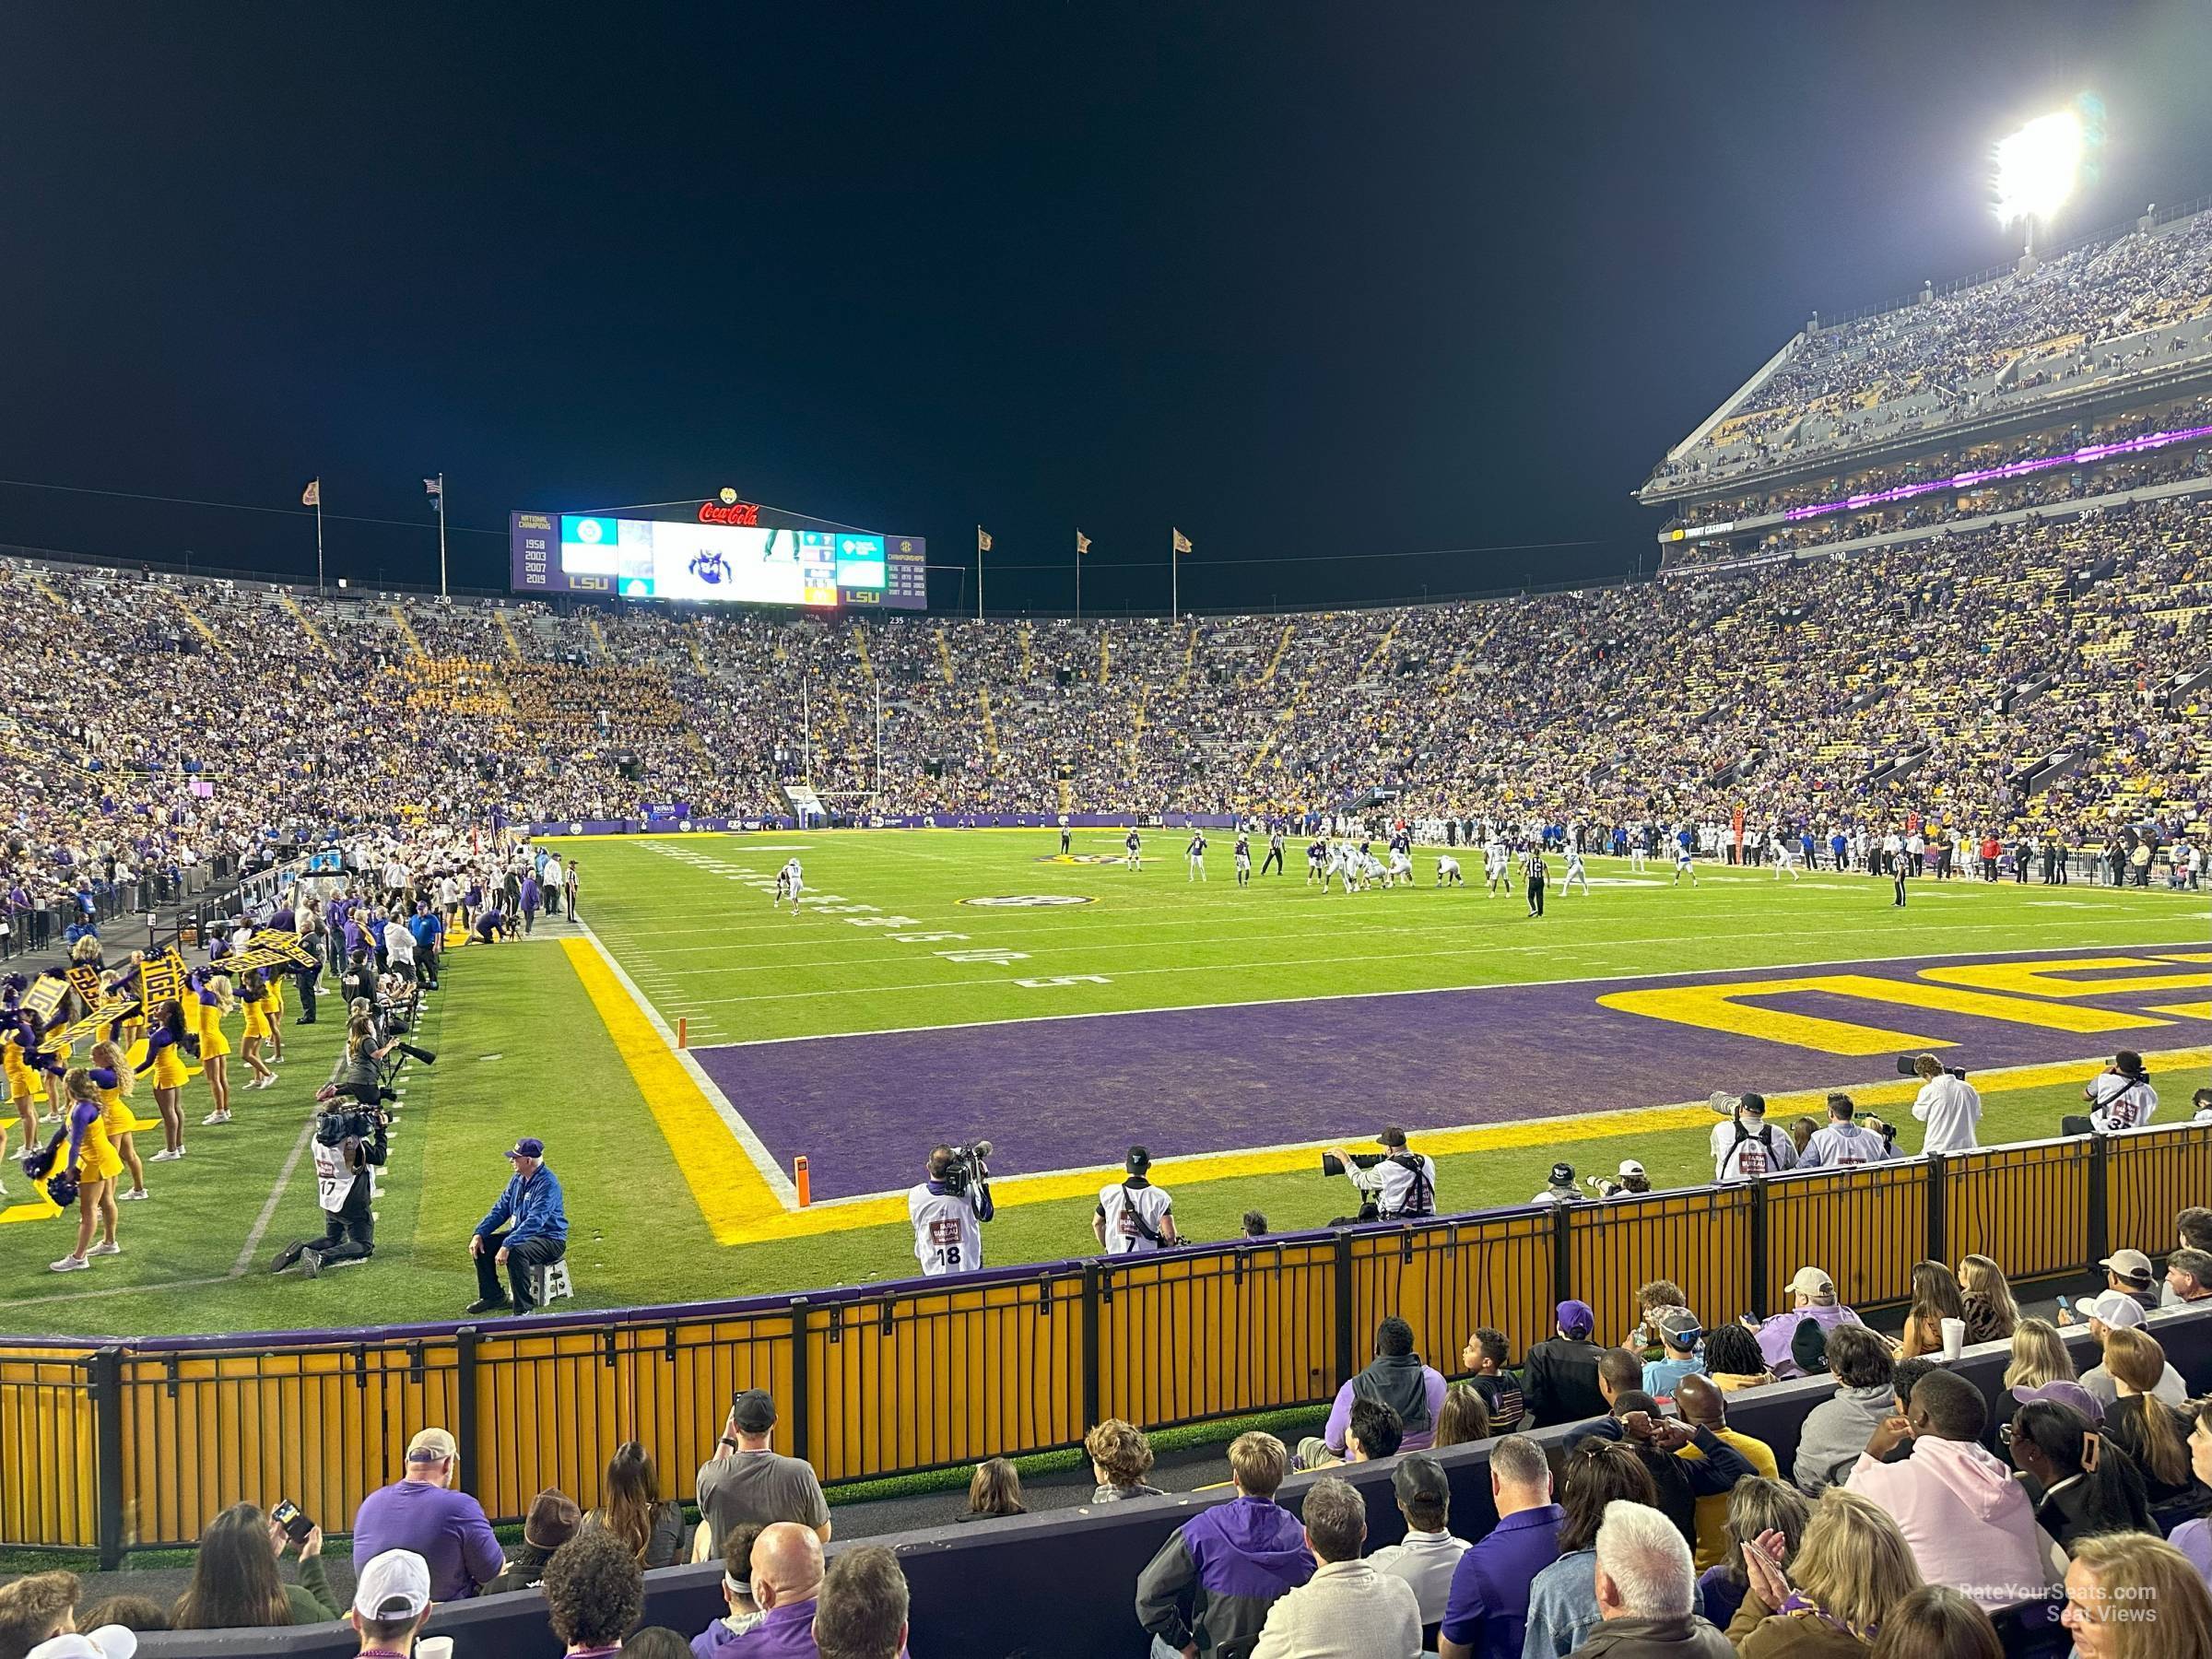 section 407, row 6 seat view  - tiger stadium